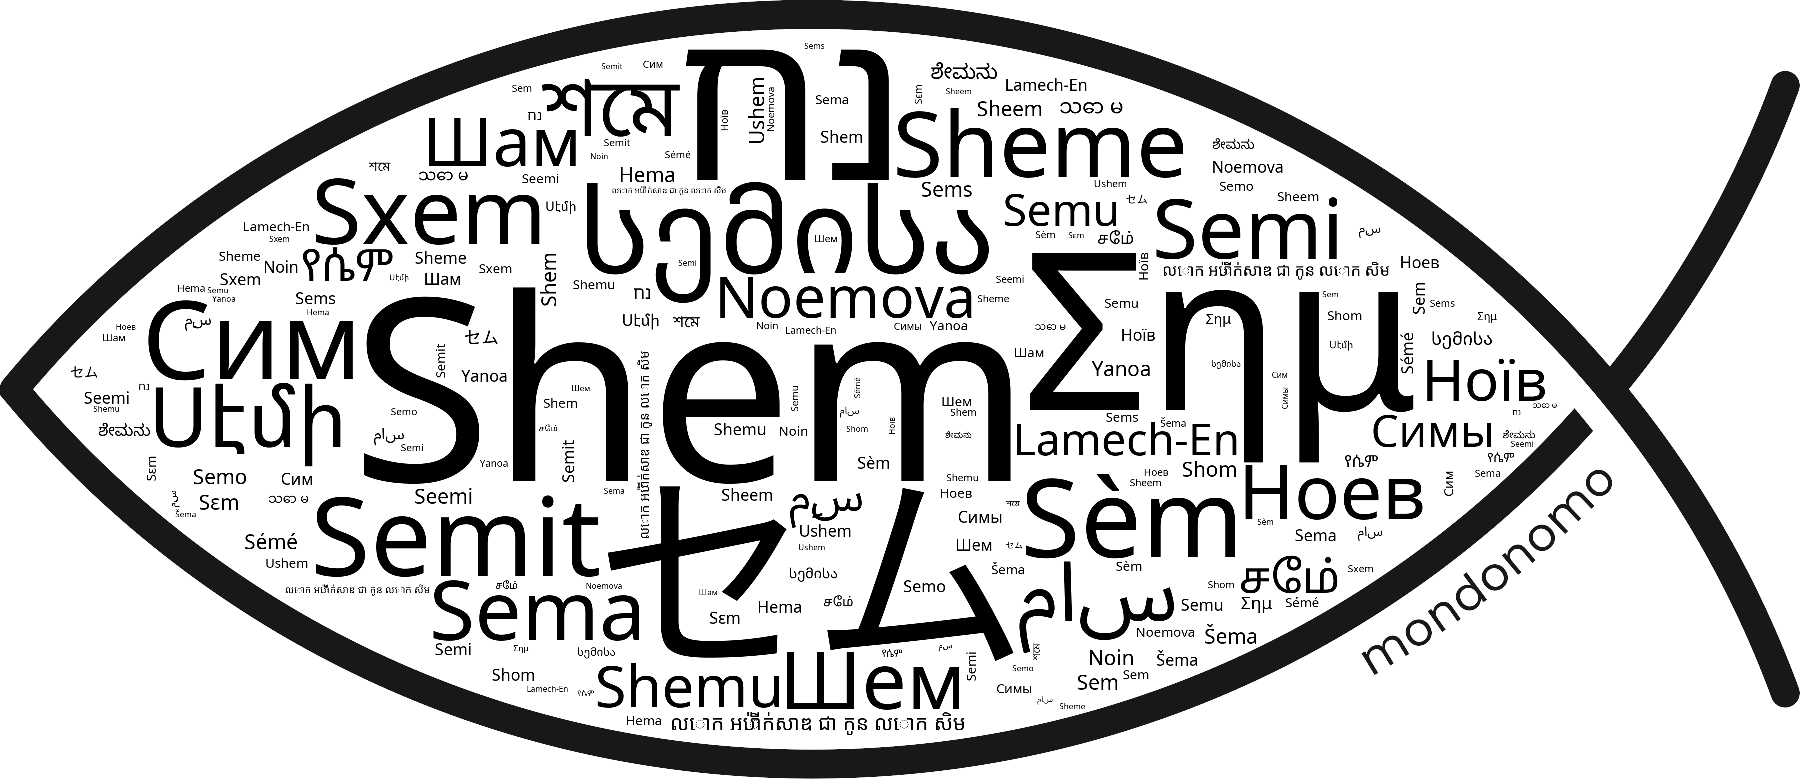 Name Shem in the world's Bibles